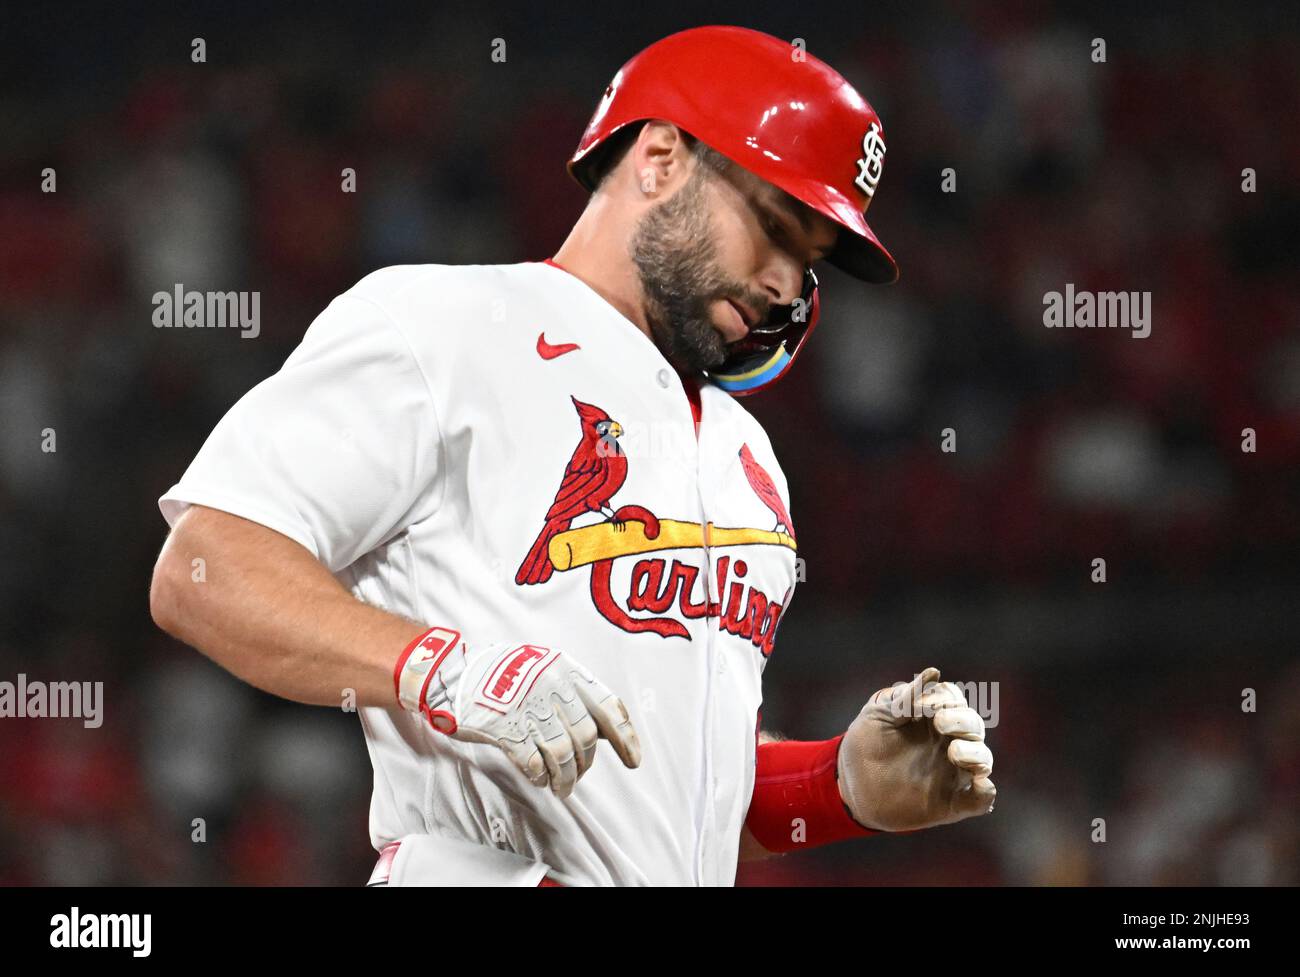 MLB is back! Save 25% on St. Louis Cardinals jerseys